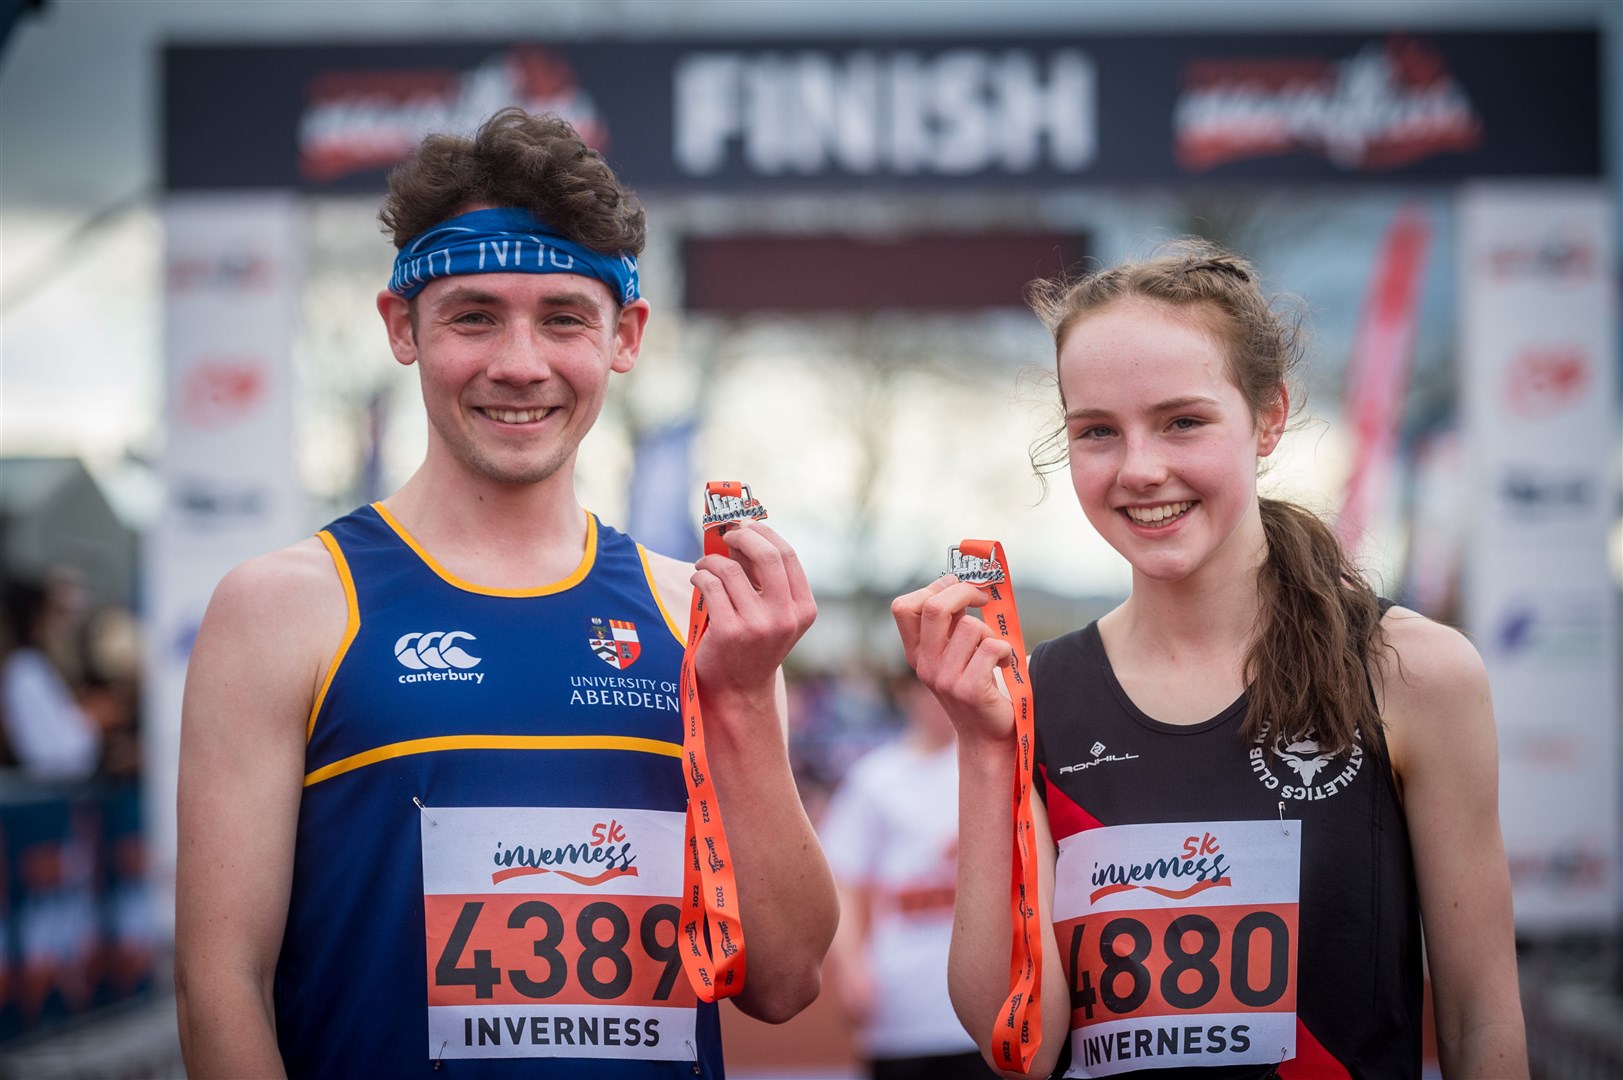 Luke Nelson of University of Aberdeen Athletics Club and Caitlyn Heggie of Ross County Athletics Club were men's and women's champions at Inverness 5K. Picture: Callum Mackay